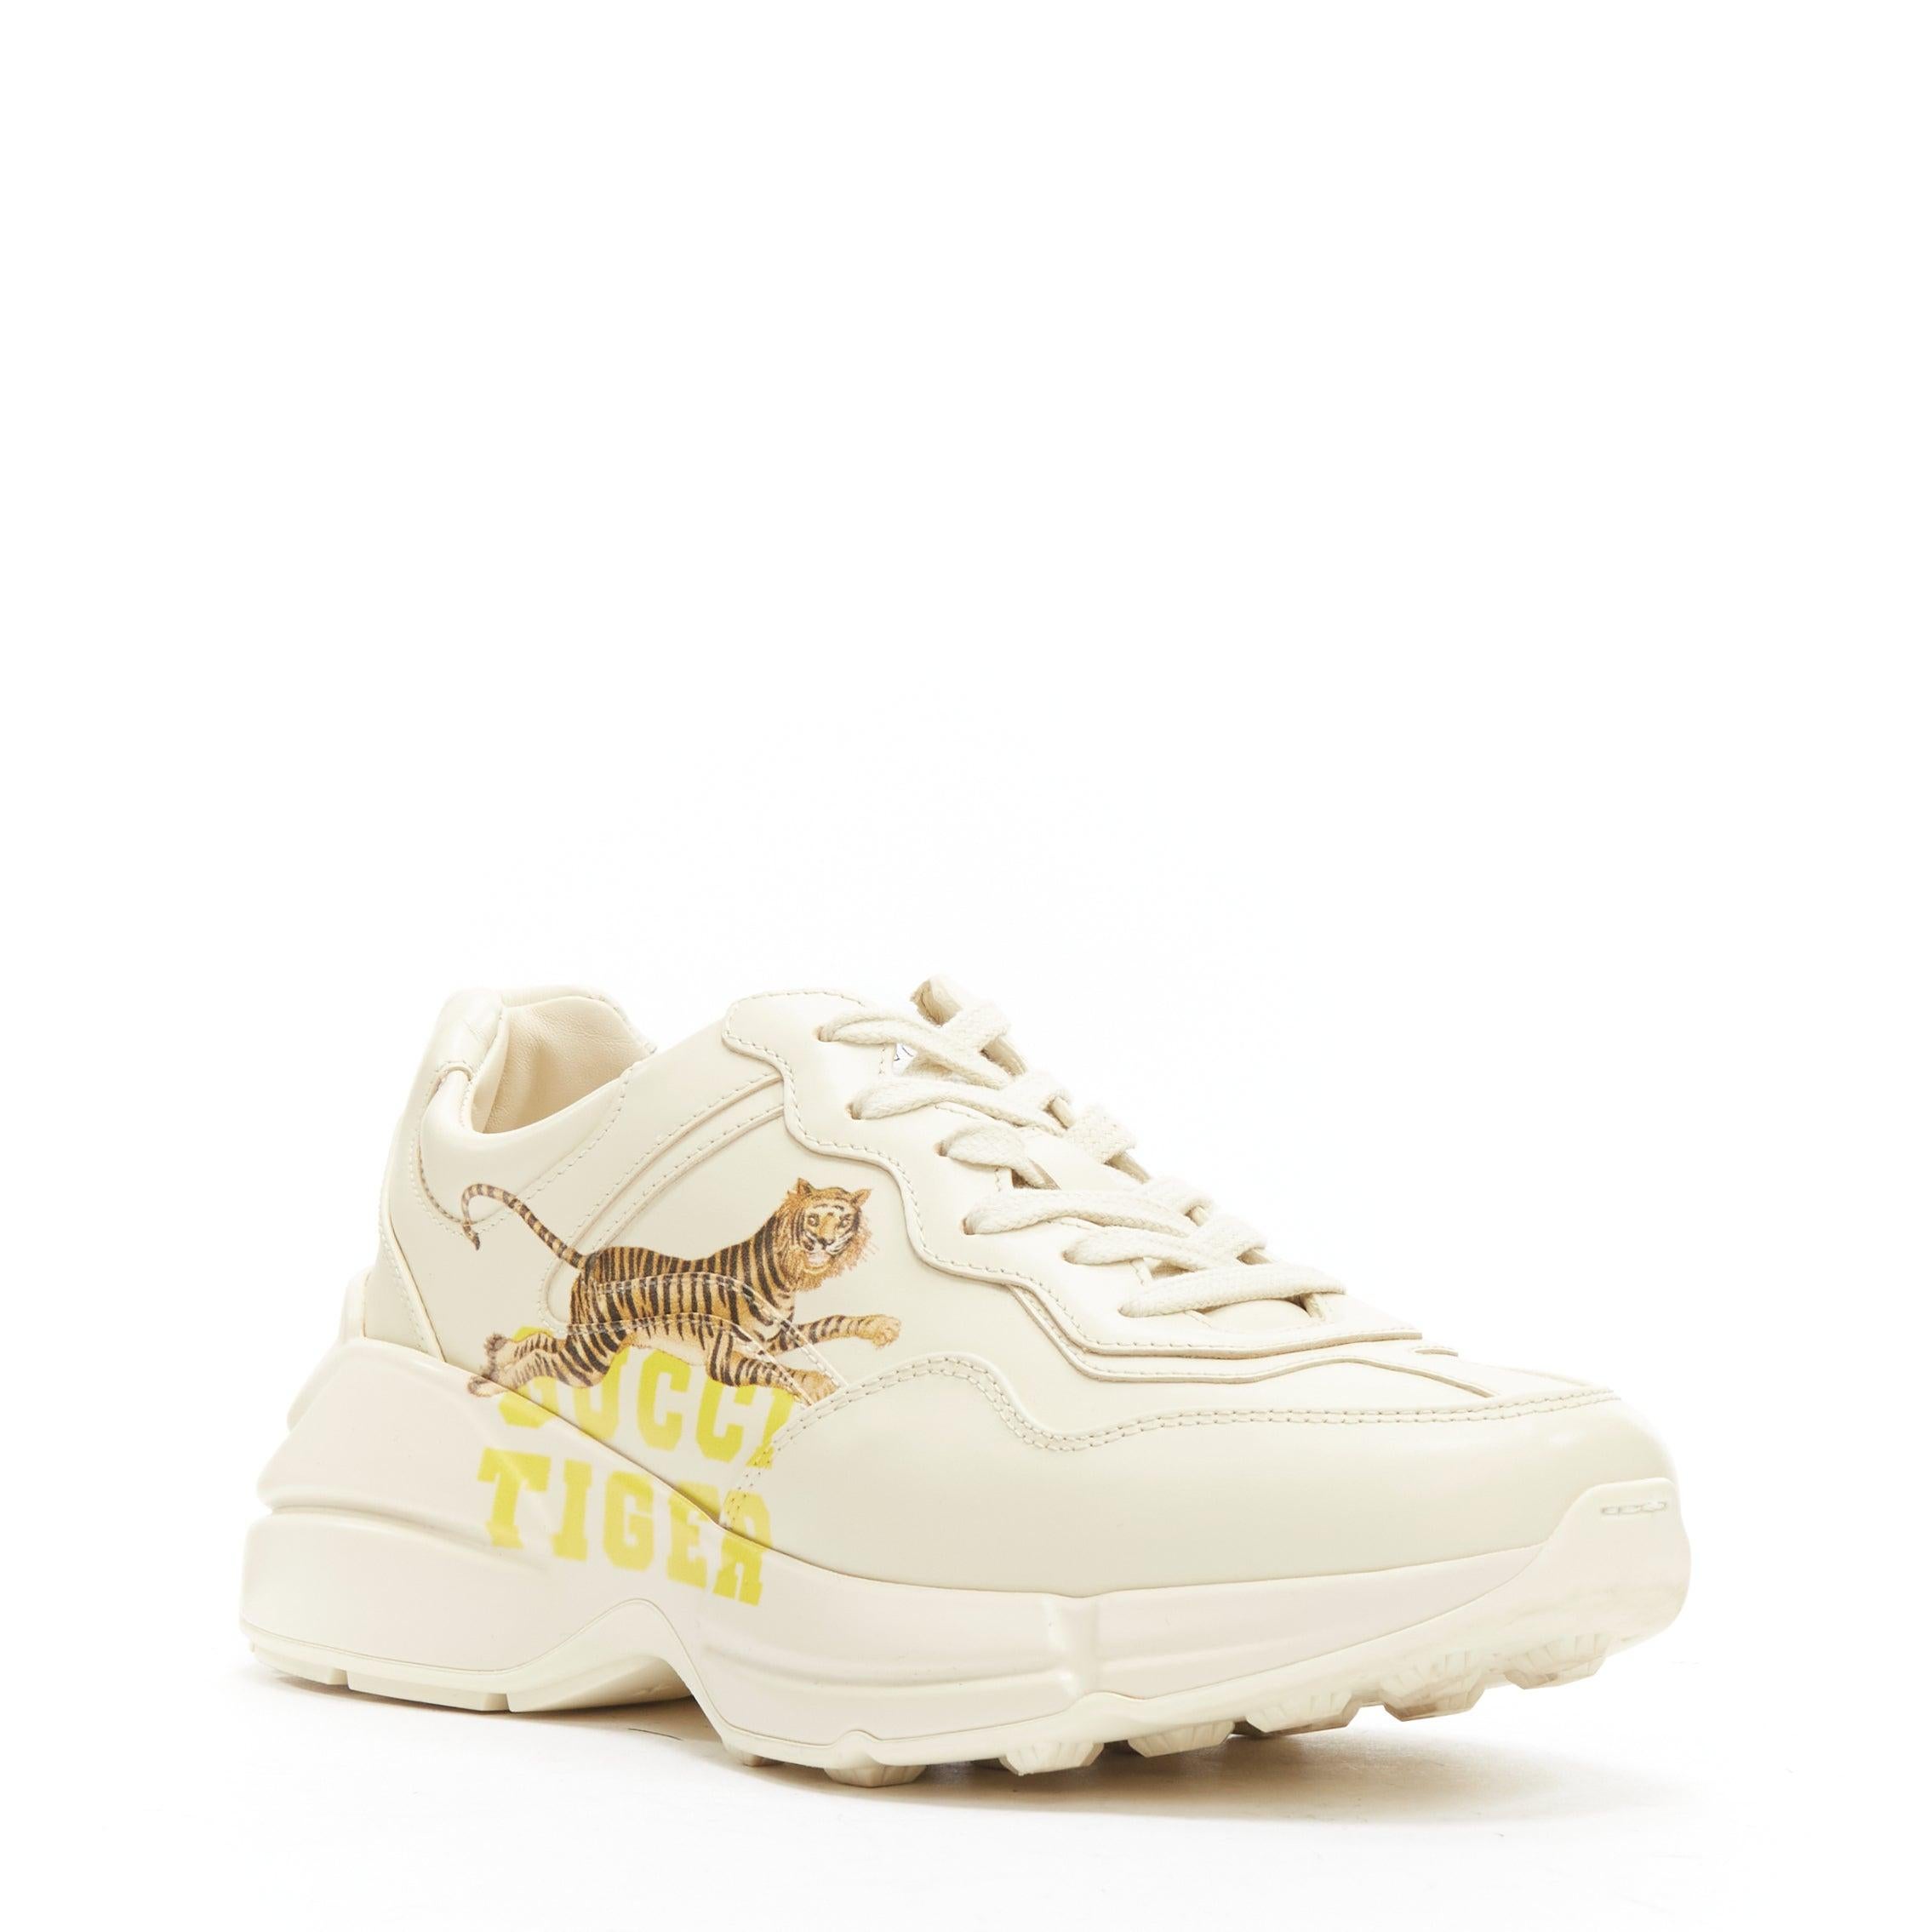 GUCCI Rhyton cream Tiger print leather panelled chunky dad sneakers EU37.5
Reference: LNKO/A02199
Brand: Gucci
Designer: Alessandro Michele
Model: Rhyton
Material: Leather
Color: Beige
Pattern: Solid
Closure: Lace Up
Lining: Beige Leather
Extra